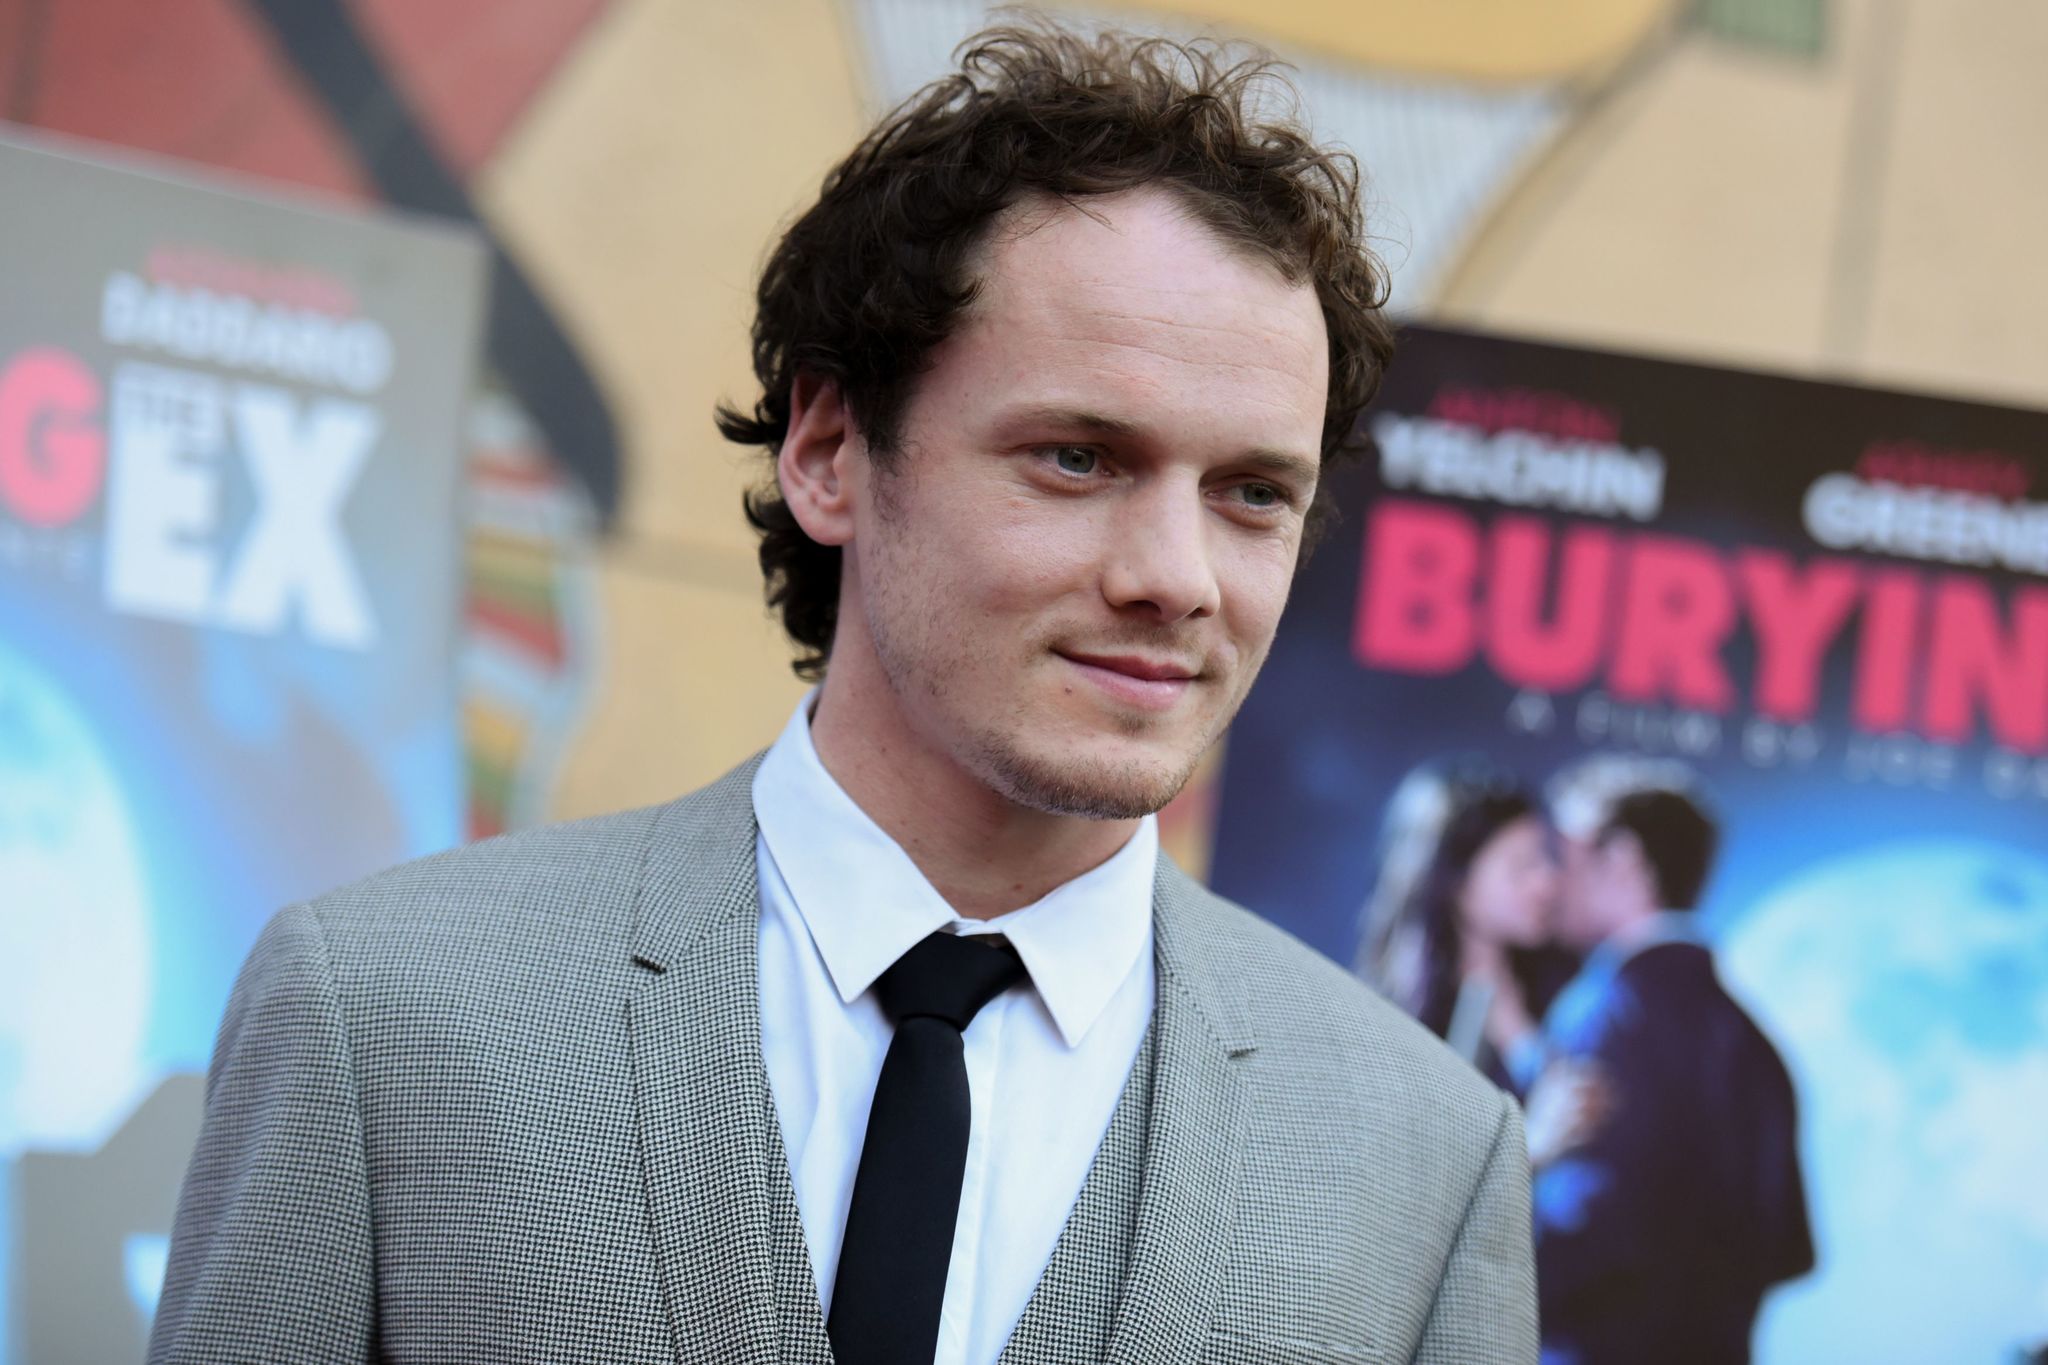 Anton Yelchin arrives at a special screening of “Burying the Ex” at Grauman’s Egyptian Theatre in Los Angeles in 2015.